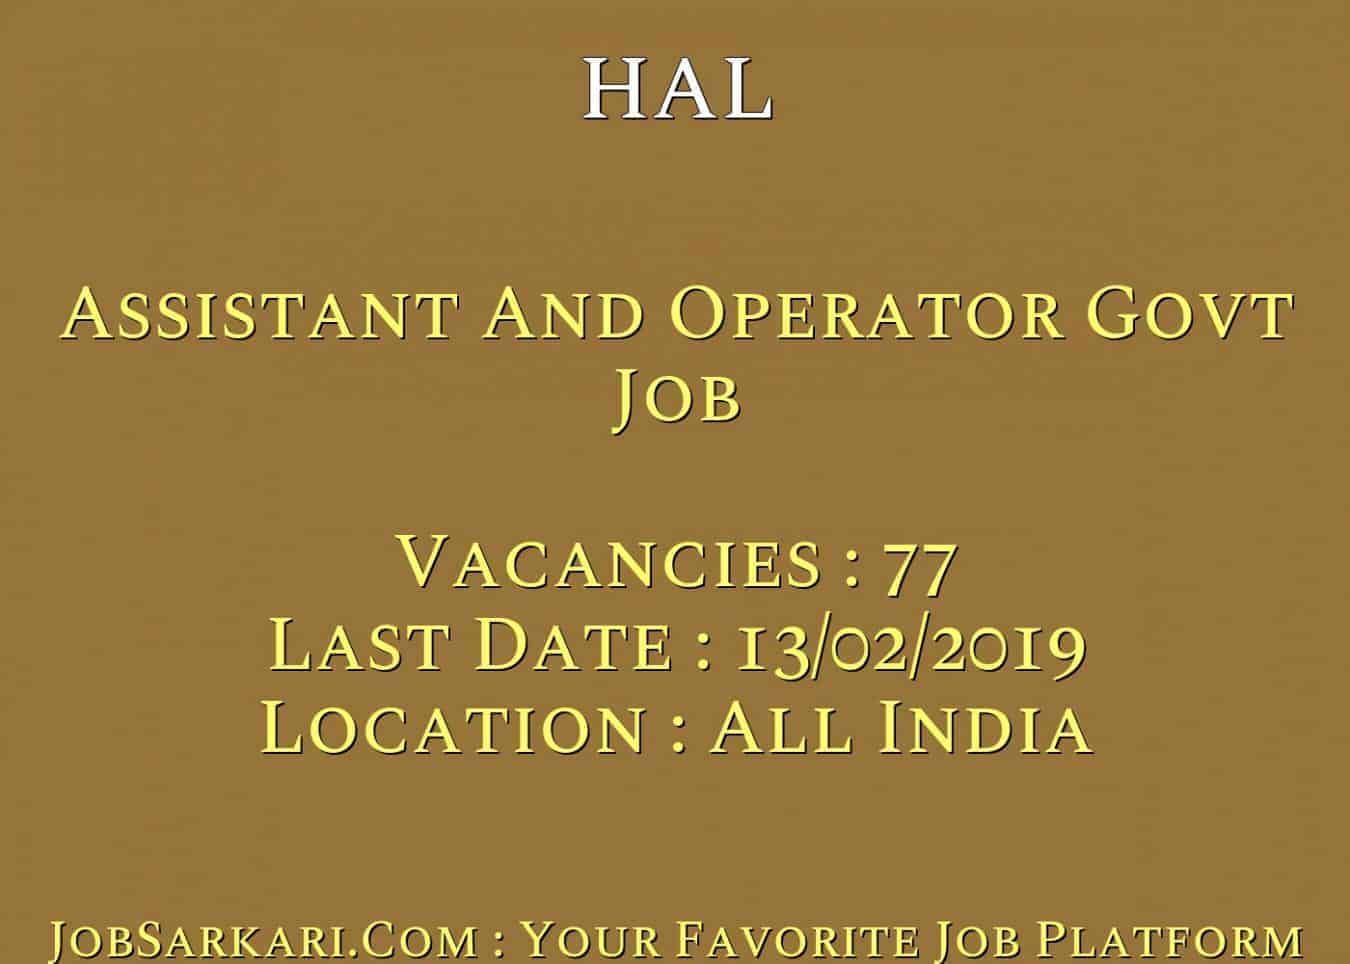 HAL Recruitment 2019 For Assistant And Operator Govt Job